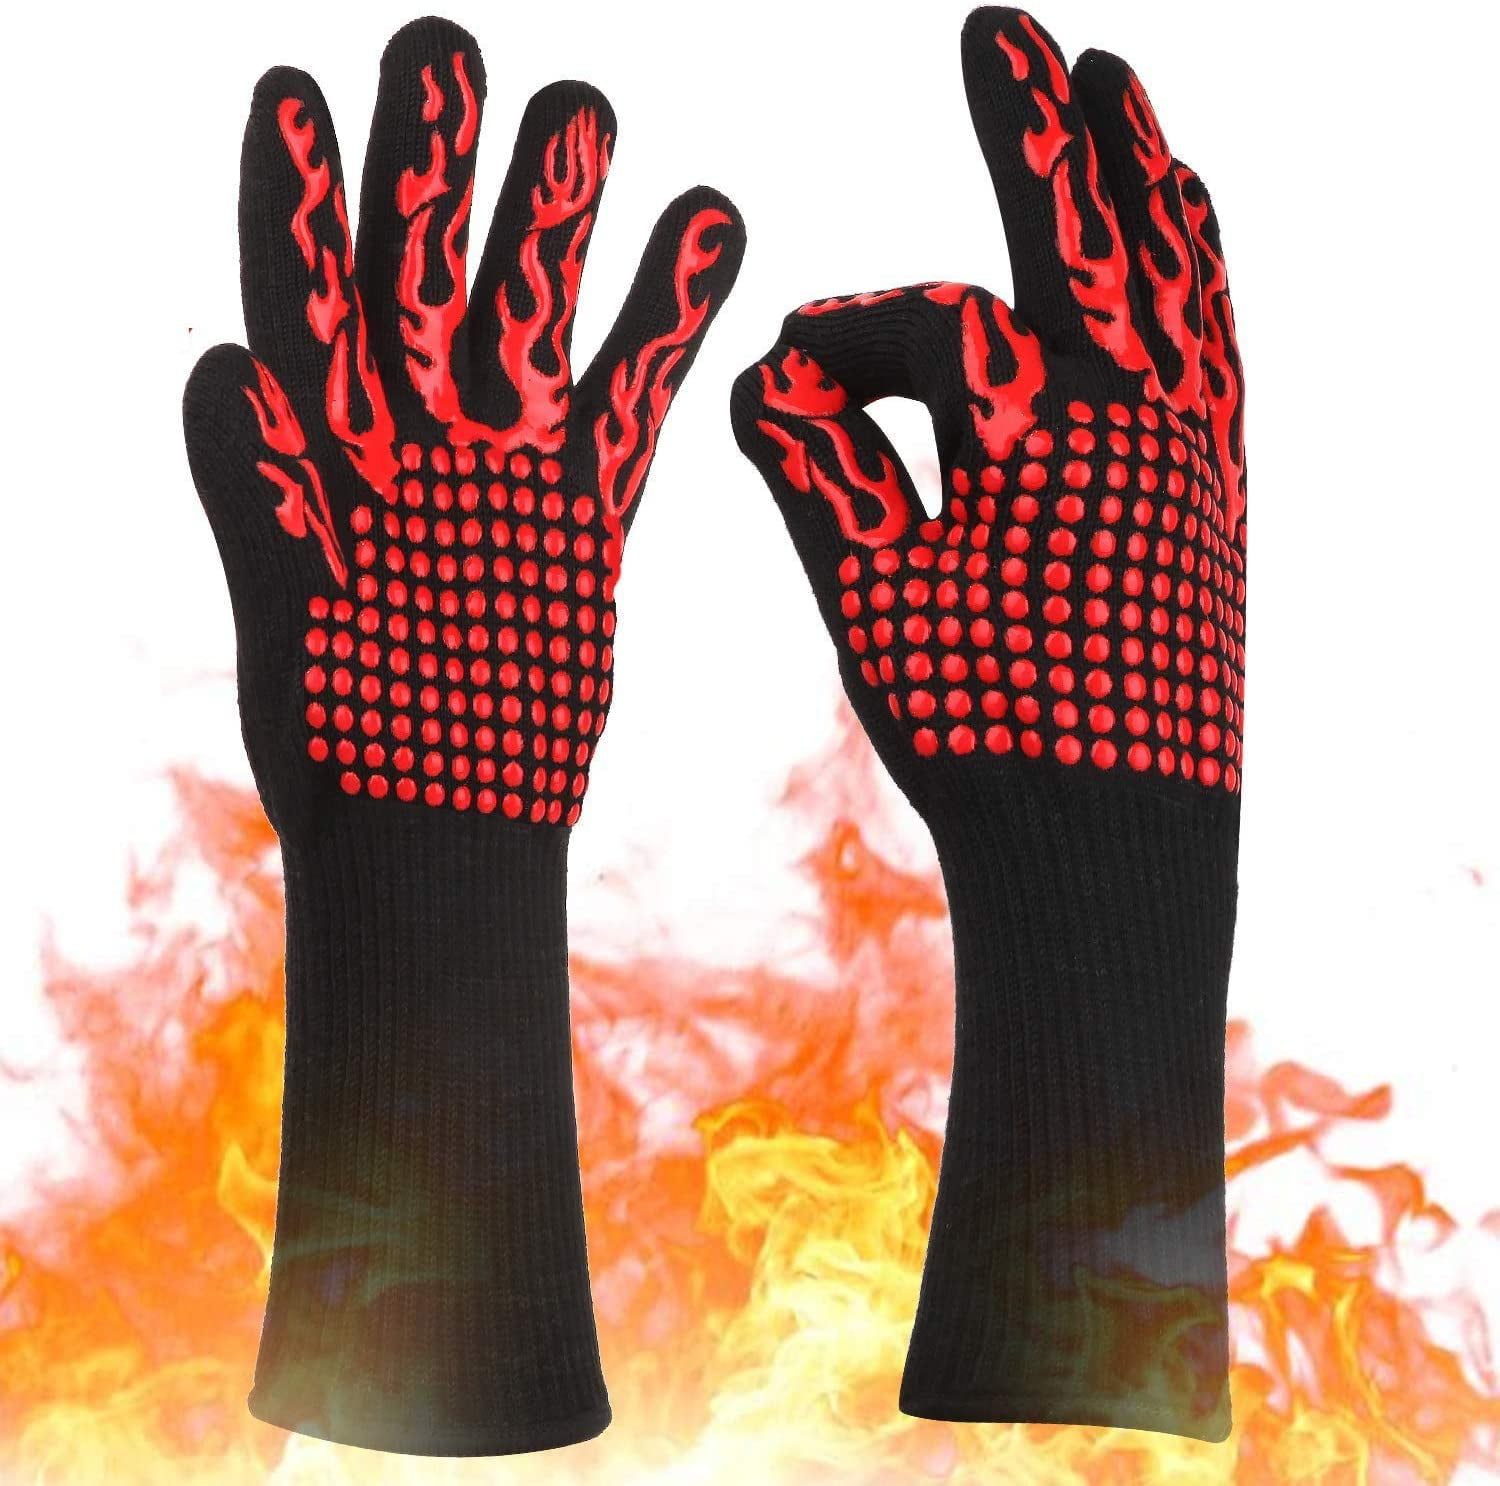 Rnkr Bbq Gloves 1472℉ Extreme Heat Resistant Grill Gloves Food Grade Kitchen Oven Mitts 7907